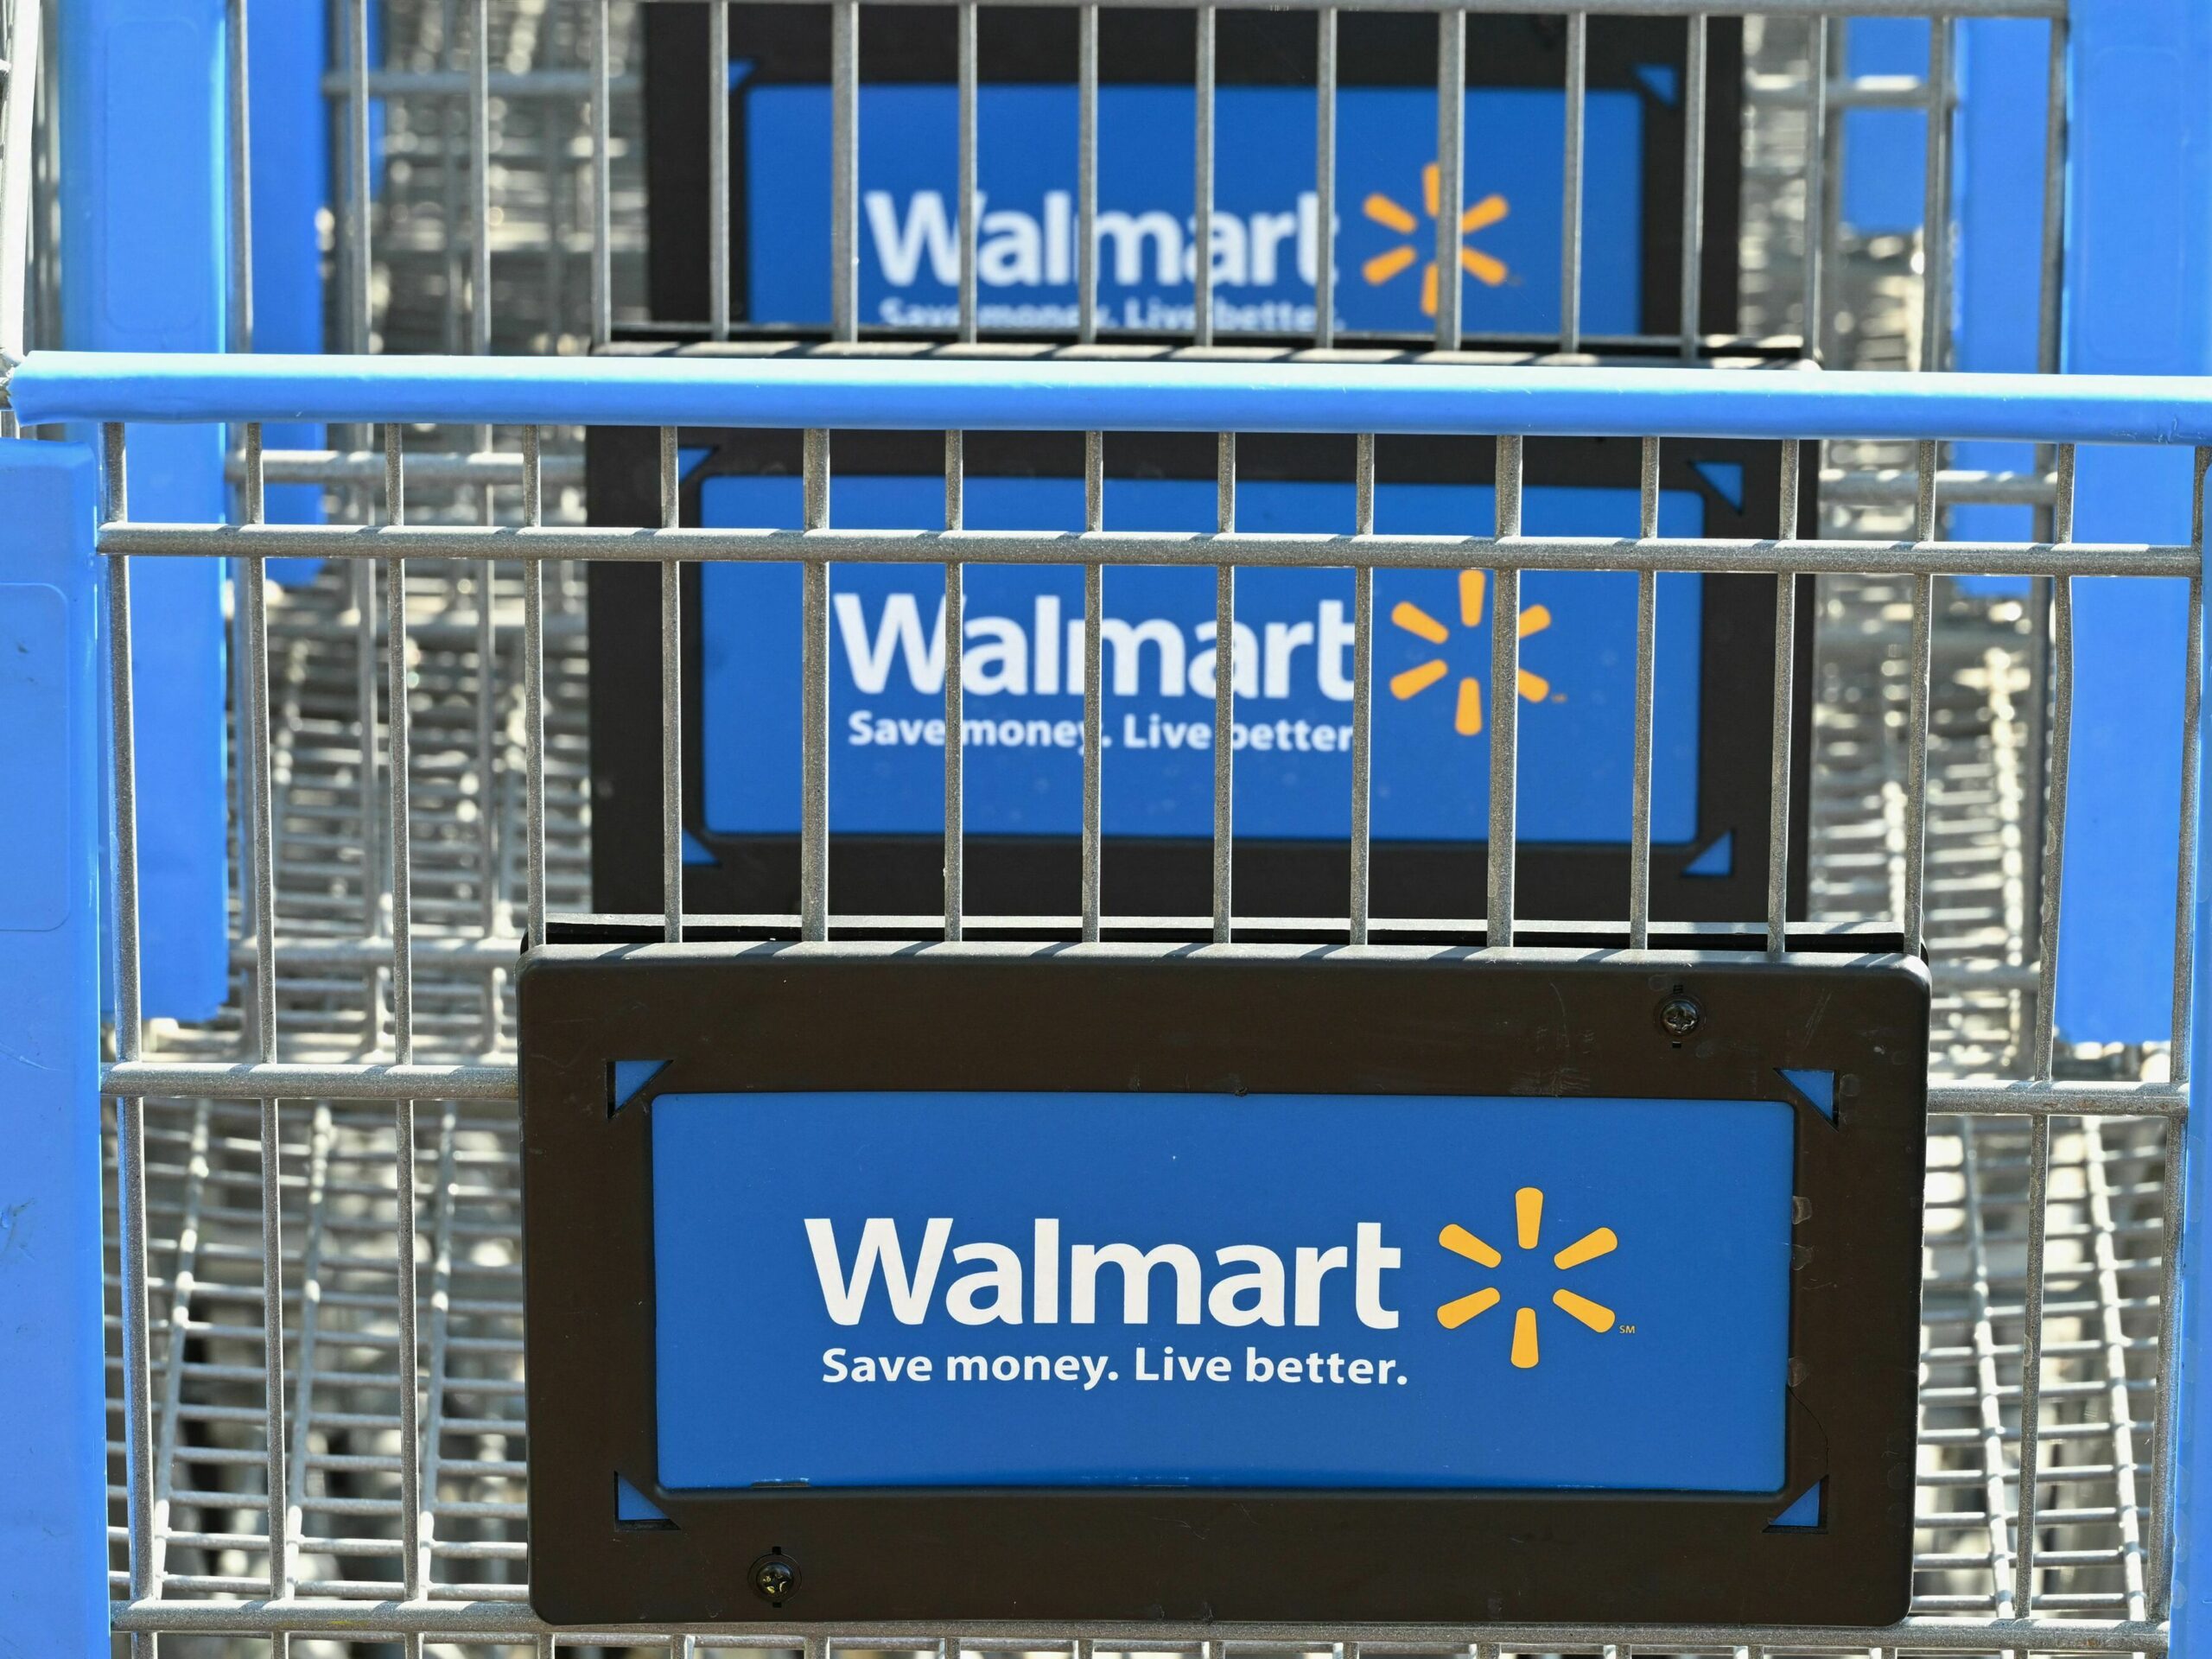 Walmart reached a $45 million settlement in a class-action lawsuit accusing it of overcharging for certain grocery items. Eligible customers have until early June to file claims for cash payments.